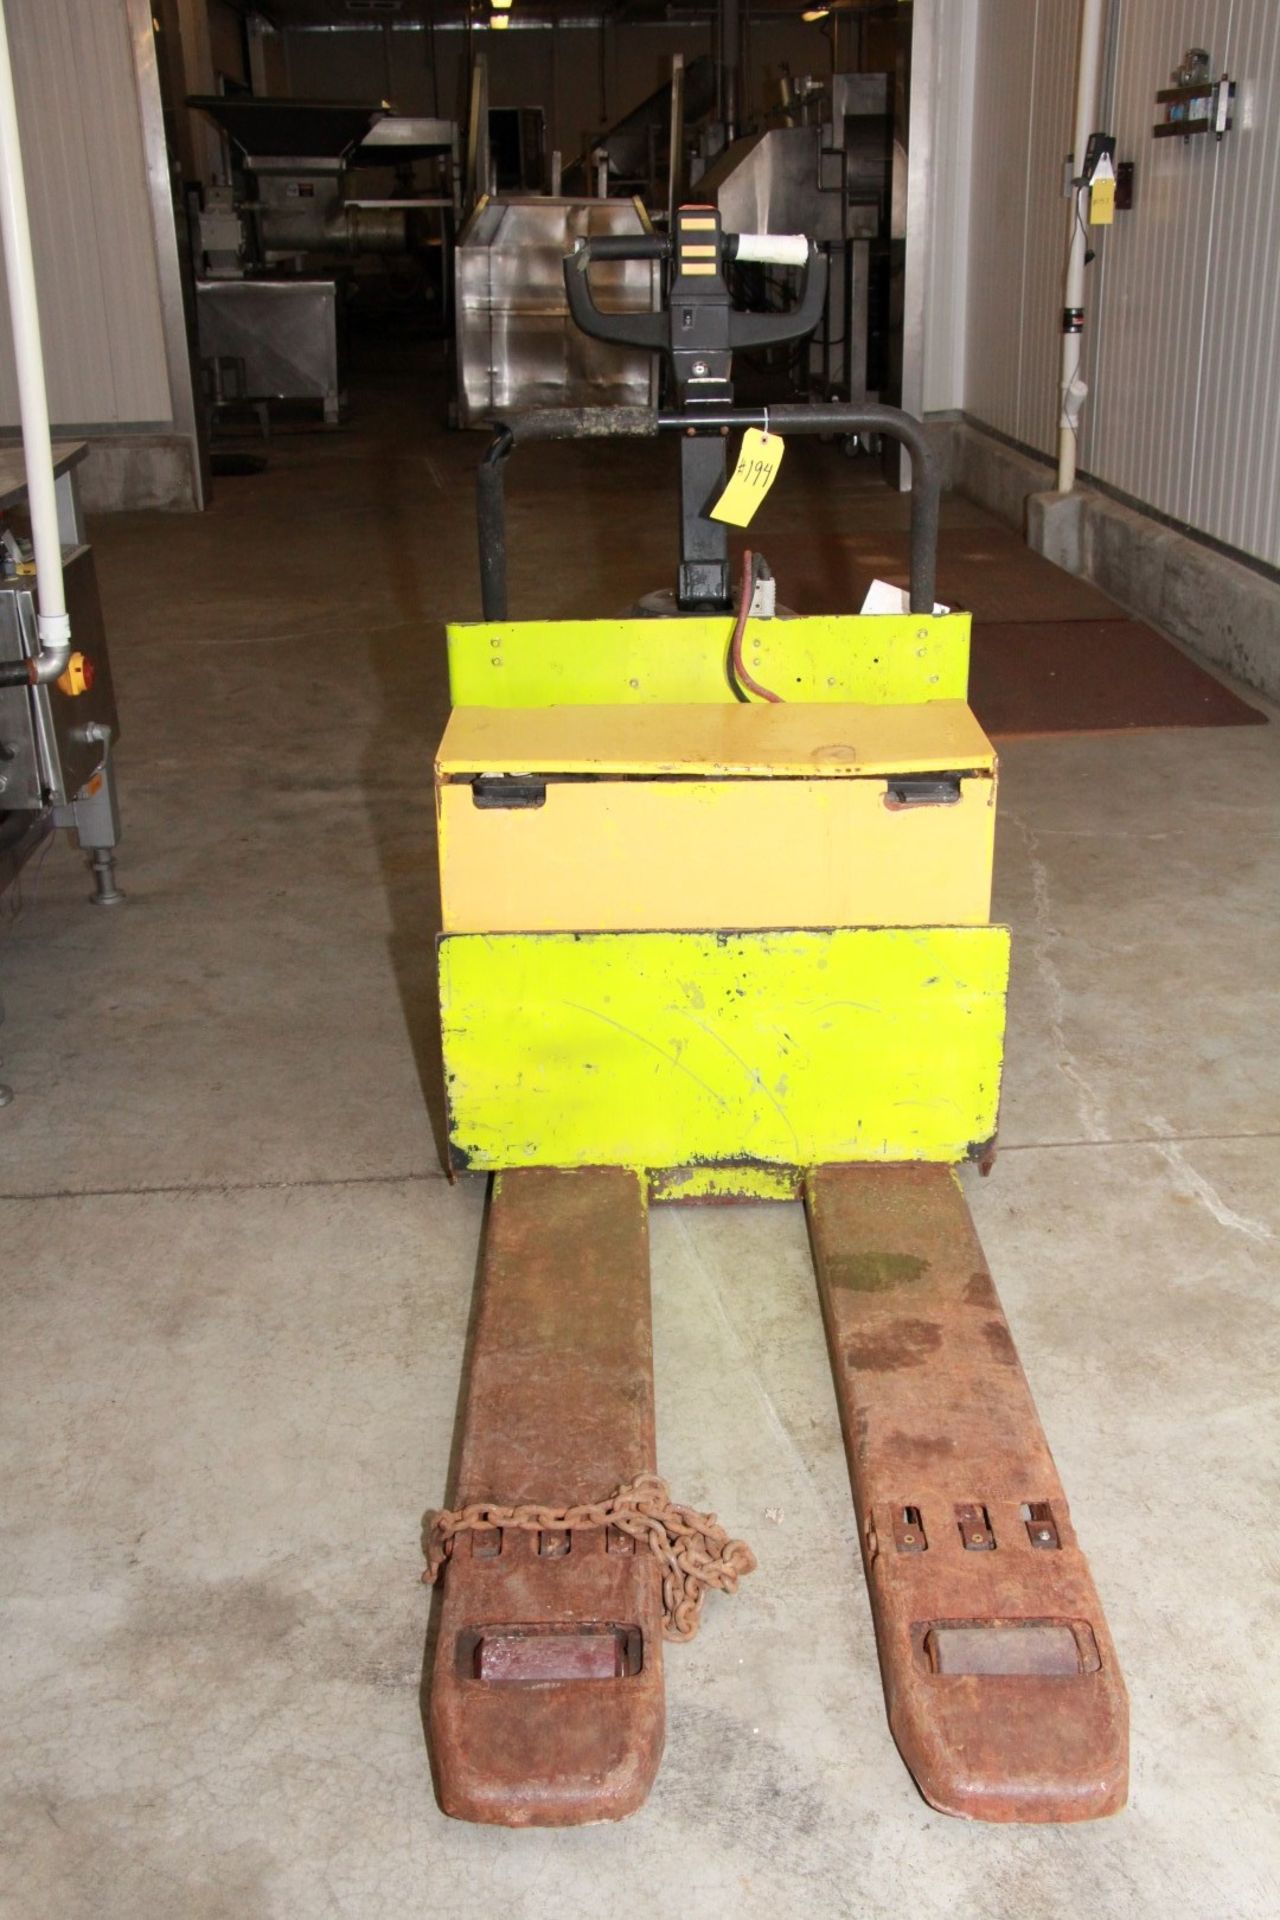 CLARK ELECTRIC PALLET JACK. MD# HWD30. SN: 6898FG. 6000# CAPACITY.